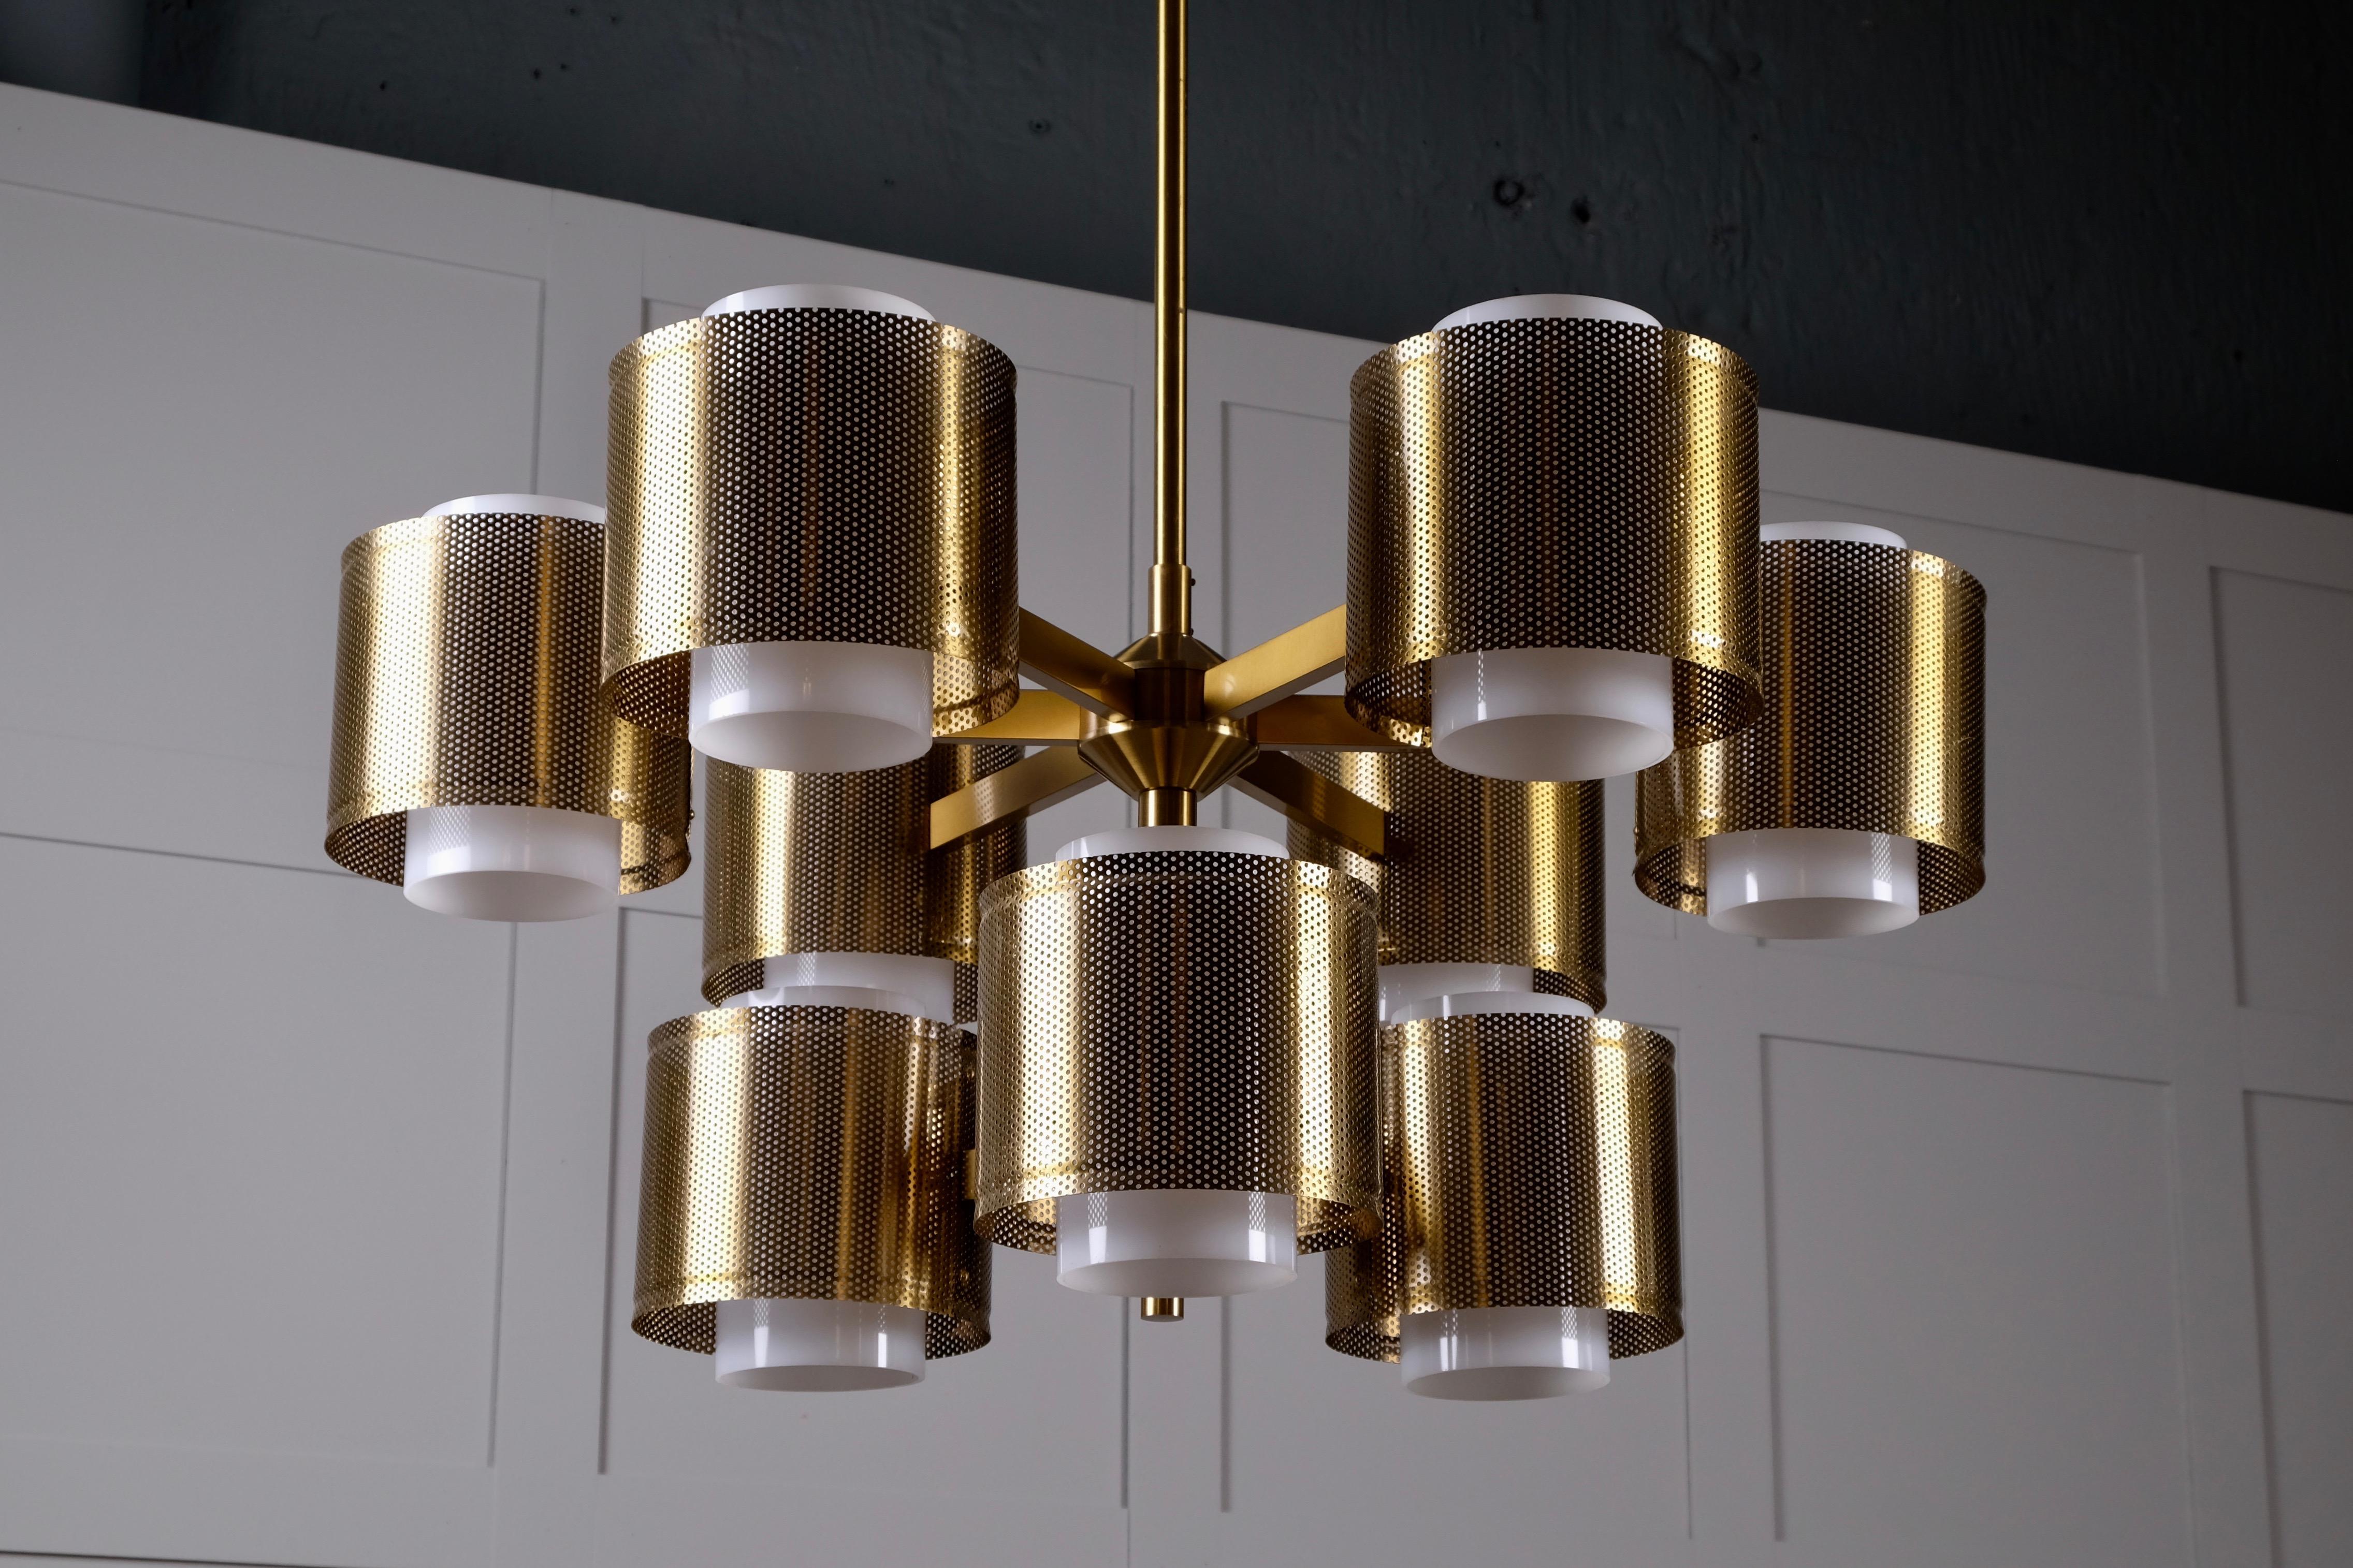 Set of 3 Brass Chandeliers by Holger Johansson, Sweden, 1960s For Sale 8